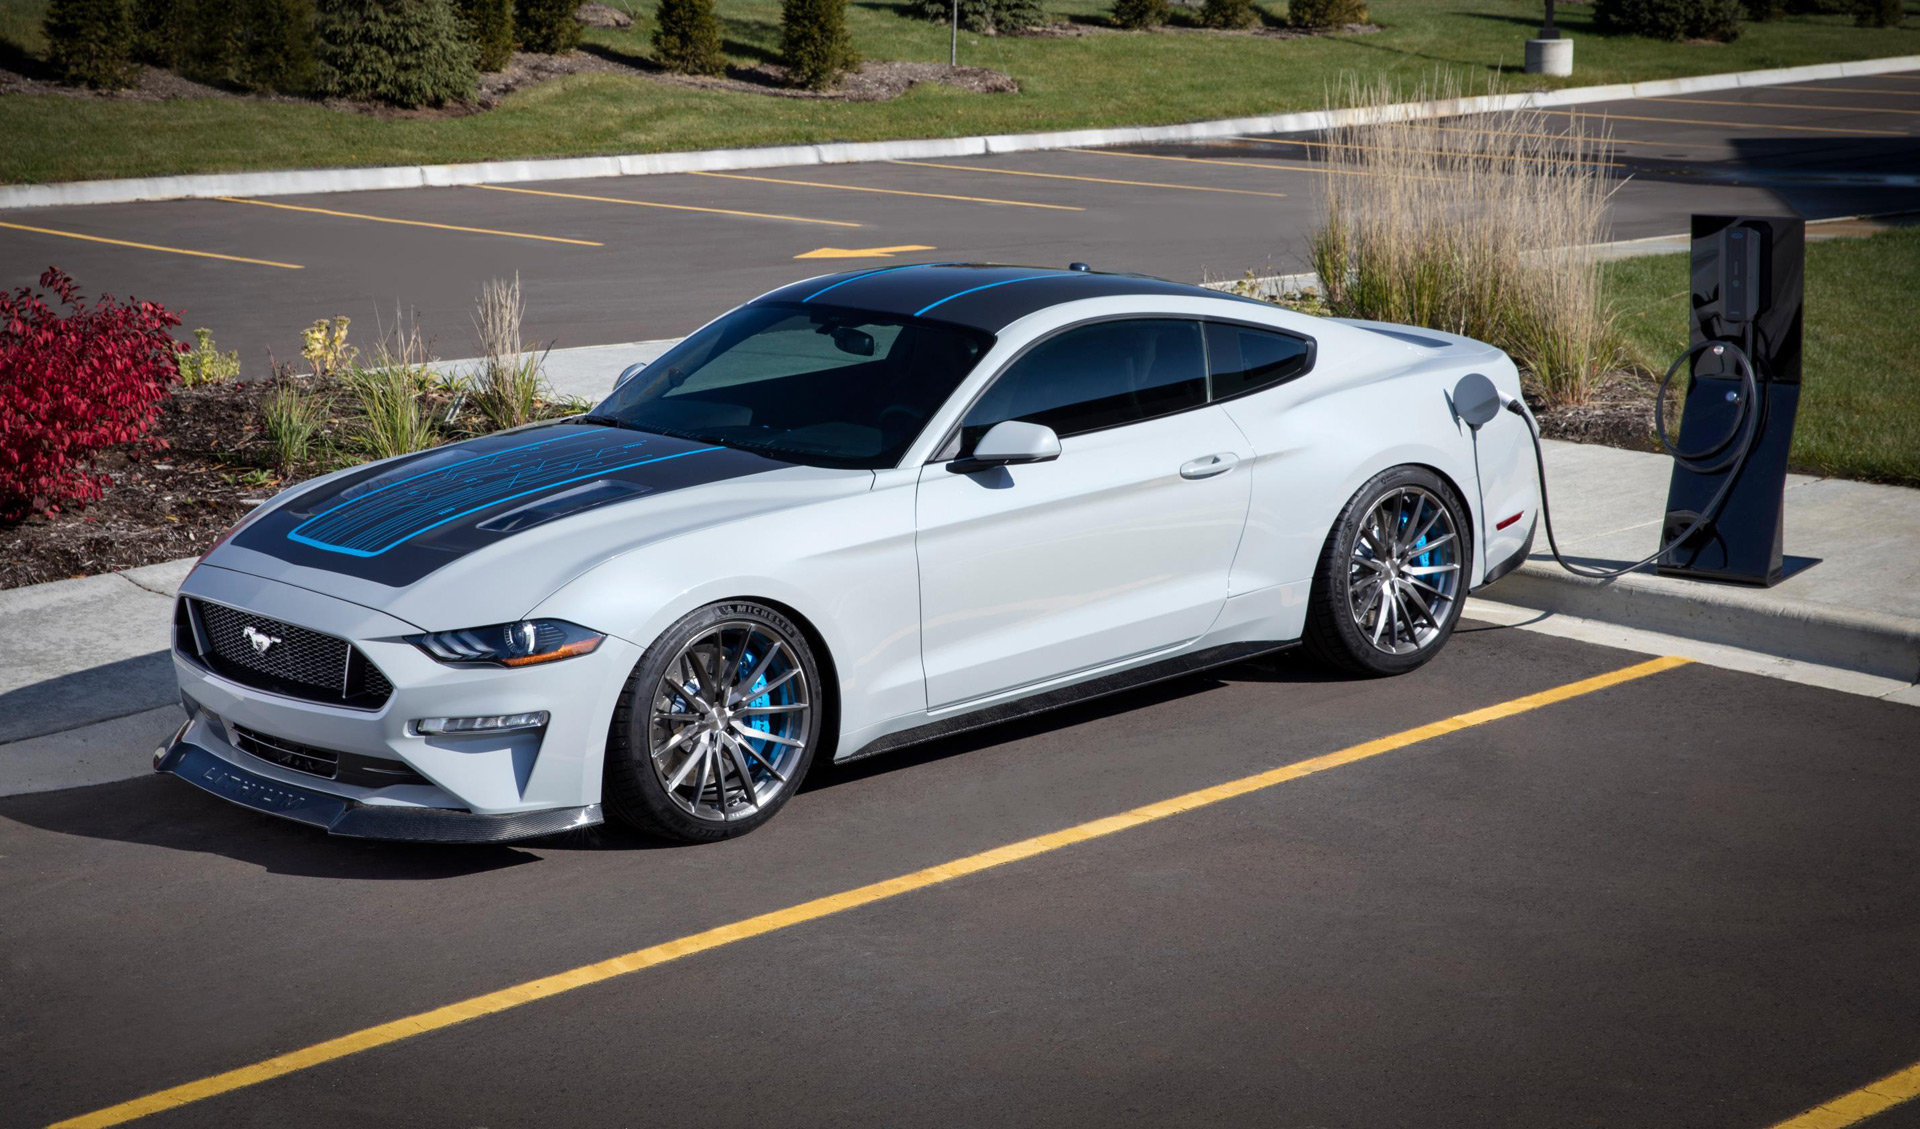 Mustang Of The Day: 2019 Lithium Mustang